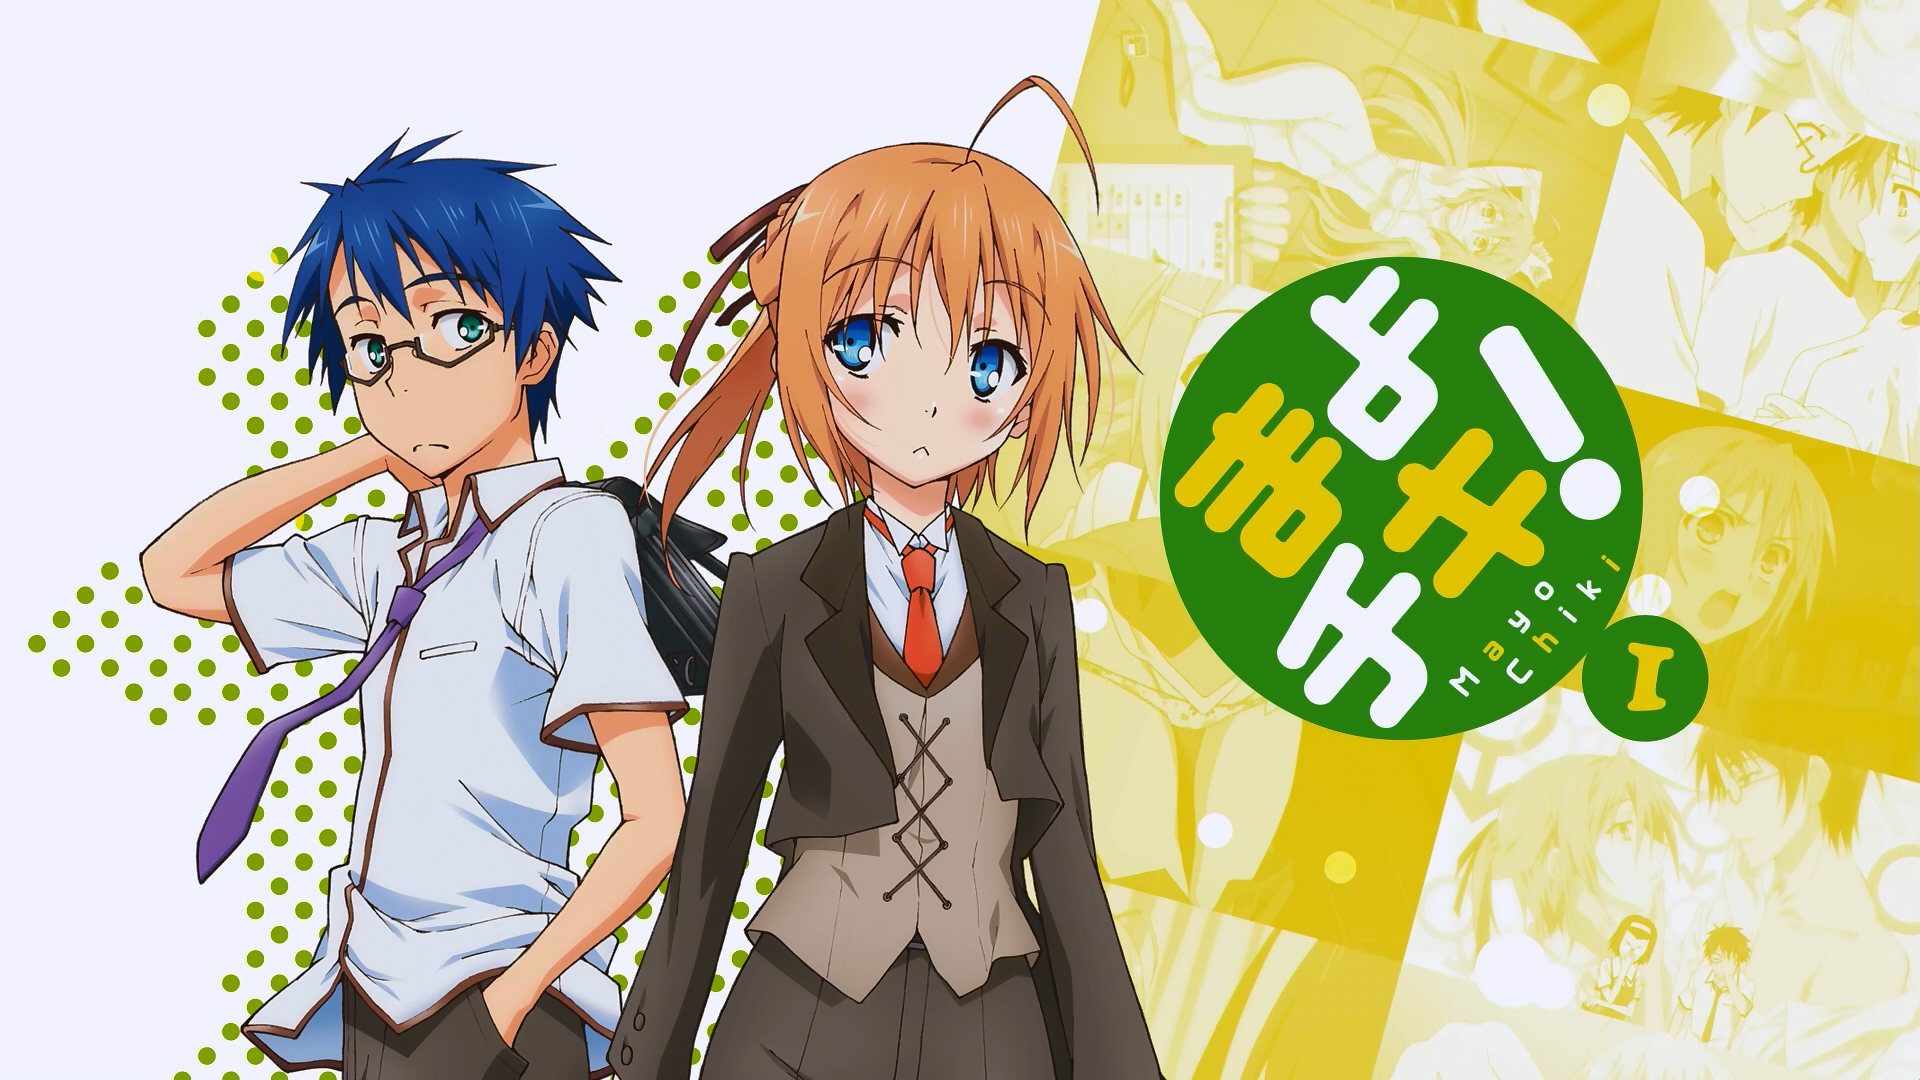 Nice Images Collection: Mayo Chiki! Desktop Wallpapers